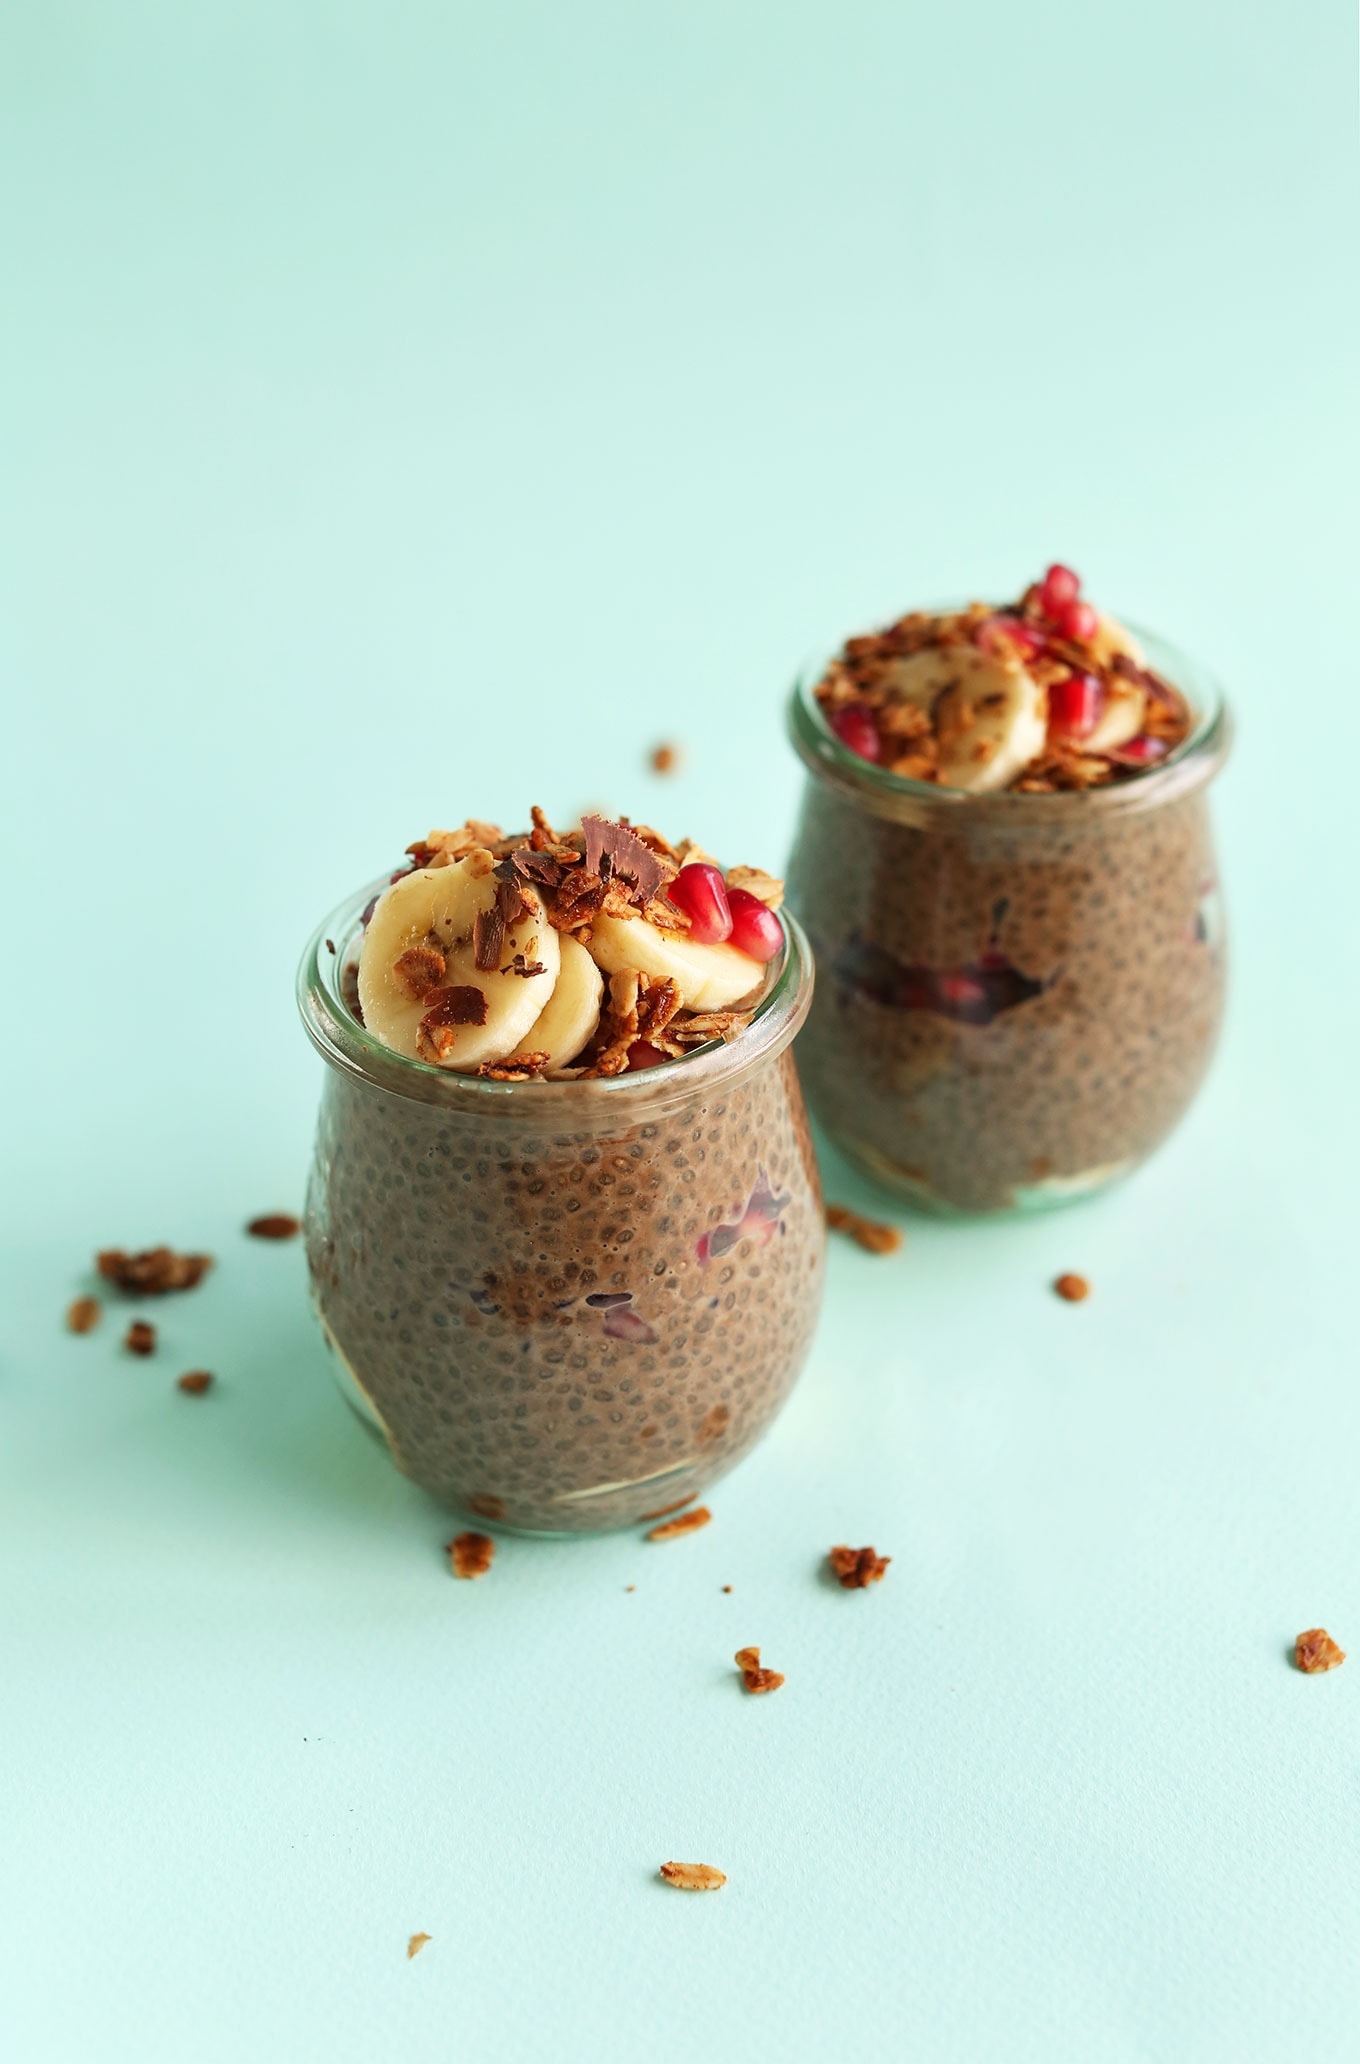 Two small jars of overnight chocolate with chia seeds pudding topped with sliced bananas and shredded chocolate.